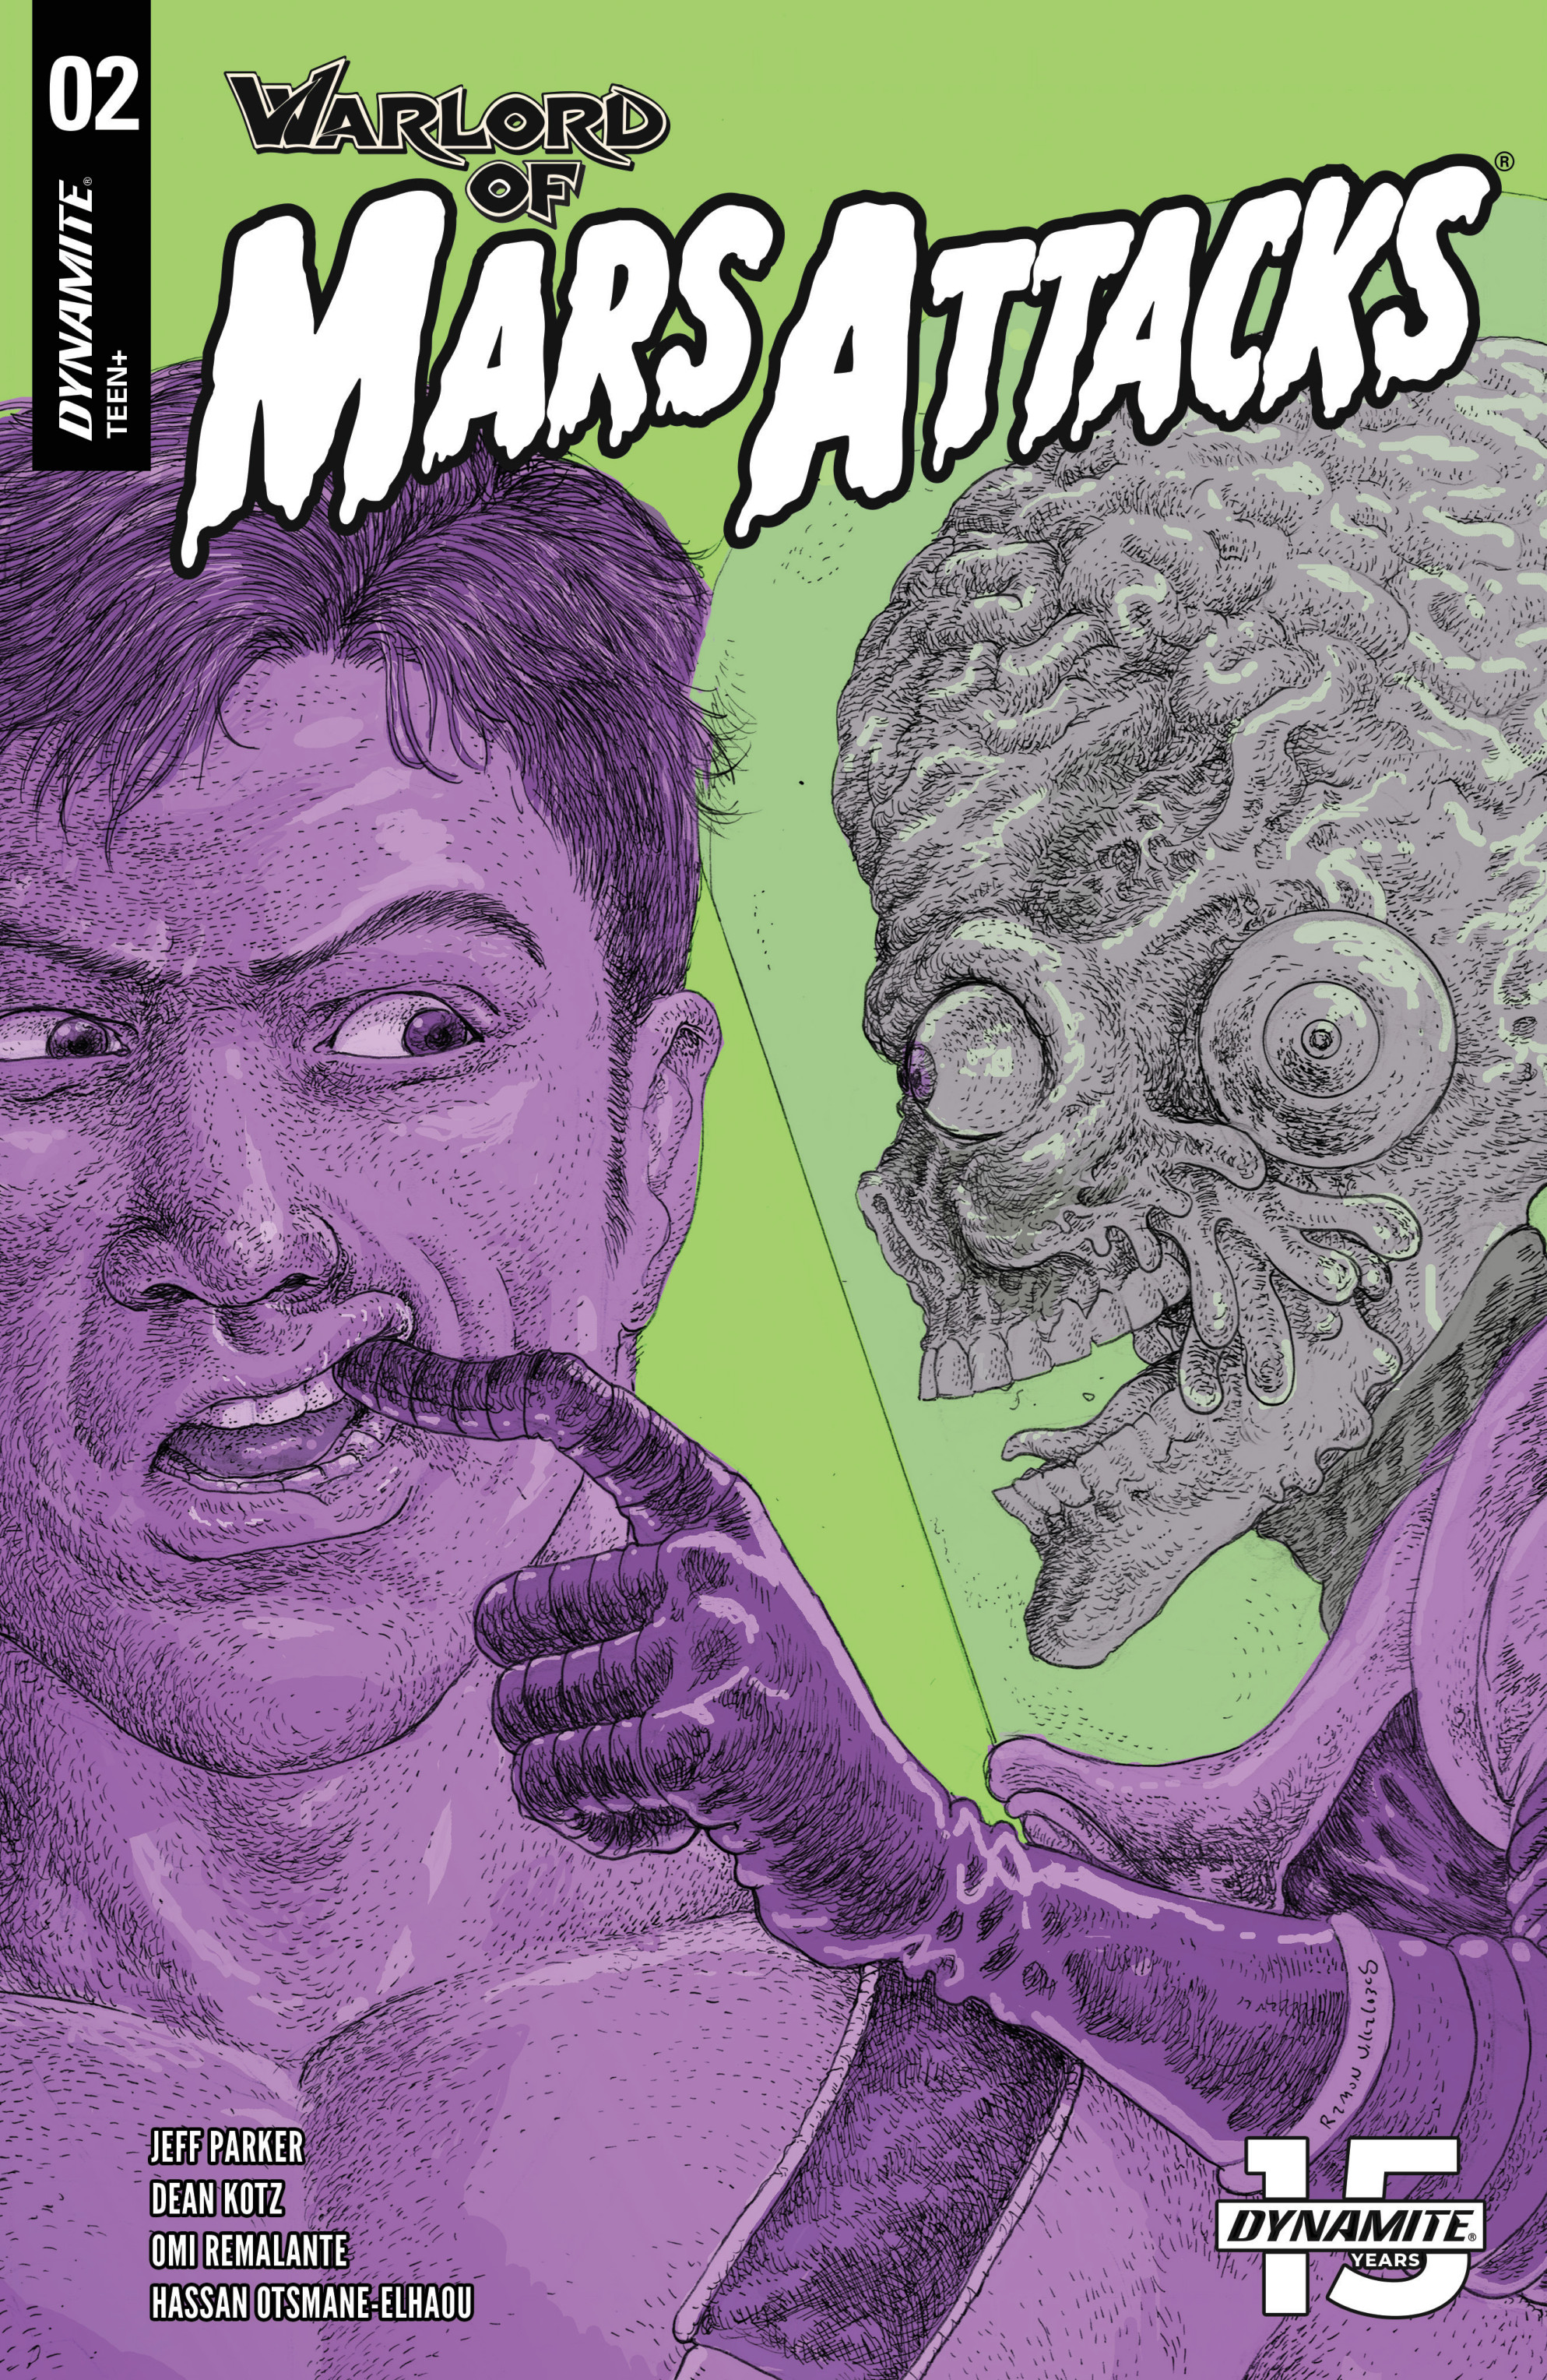 Read online Warlord of Mars Attacks comic -  Issue #2 - 3